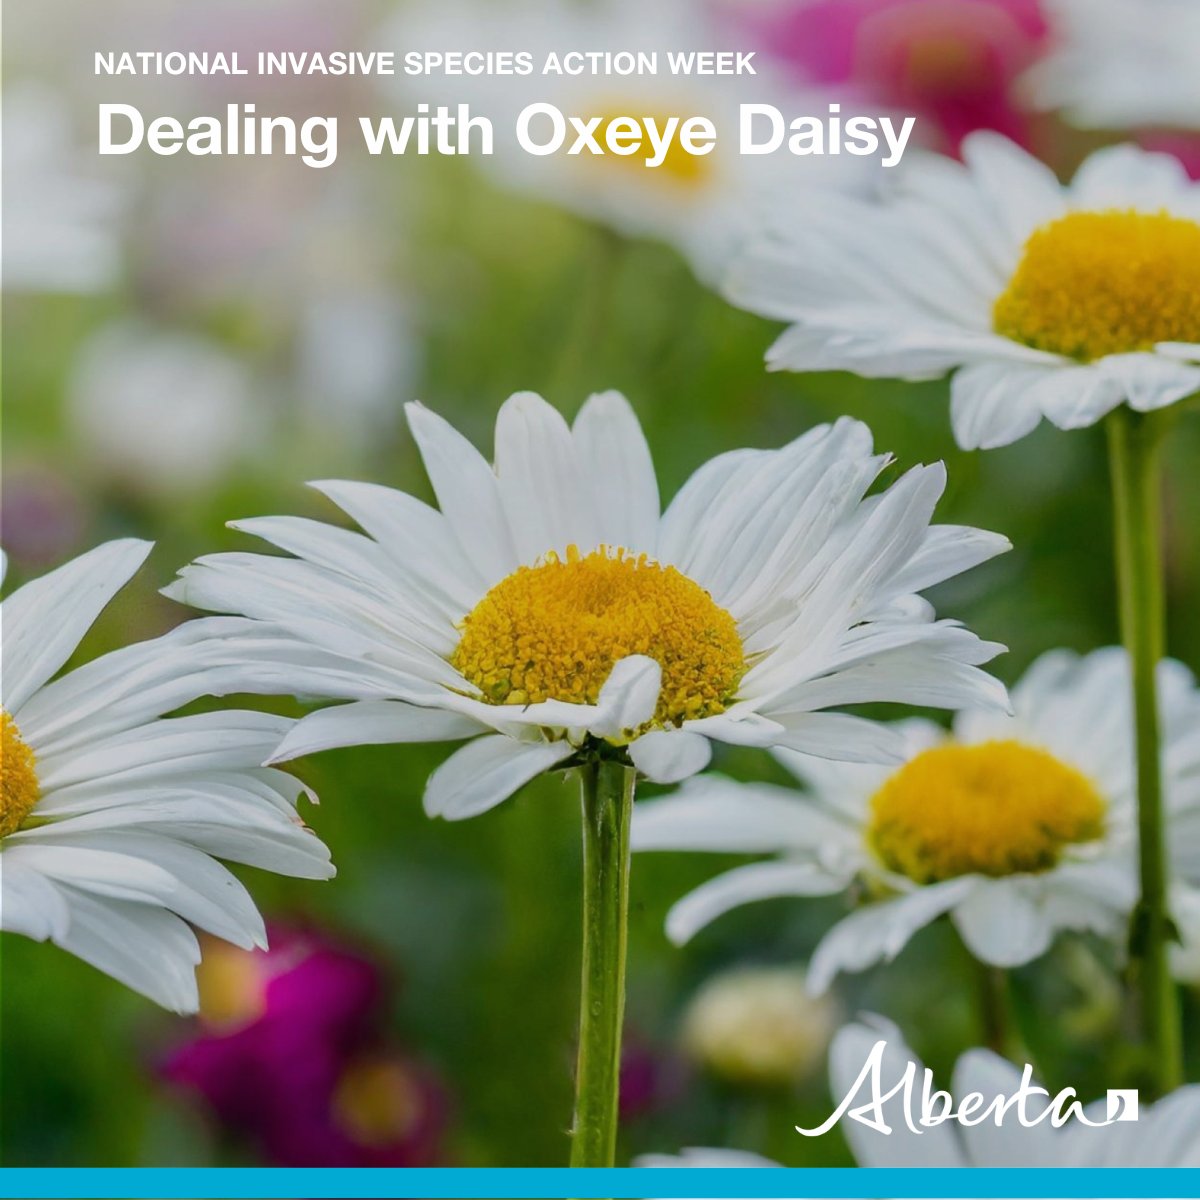 The Oxeye Daisy may look like a pretty wildflower, but it’s an aggressive invader of Alberta pastures and rangelands.

Its biggest impact is on cattle grazing. Cows avoid this flower, so pastures infested with dense Oxeye will decrease forage available for grazing.

#abag #NISAW